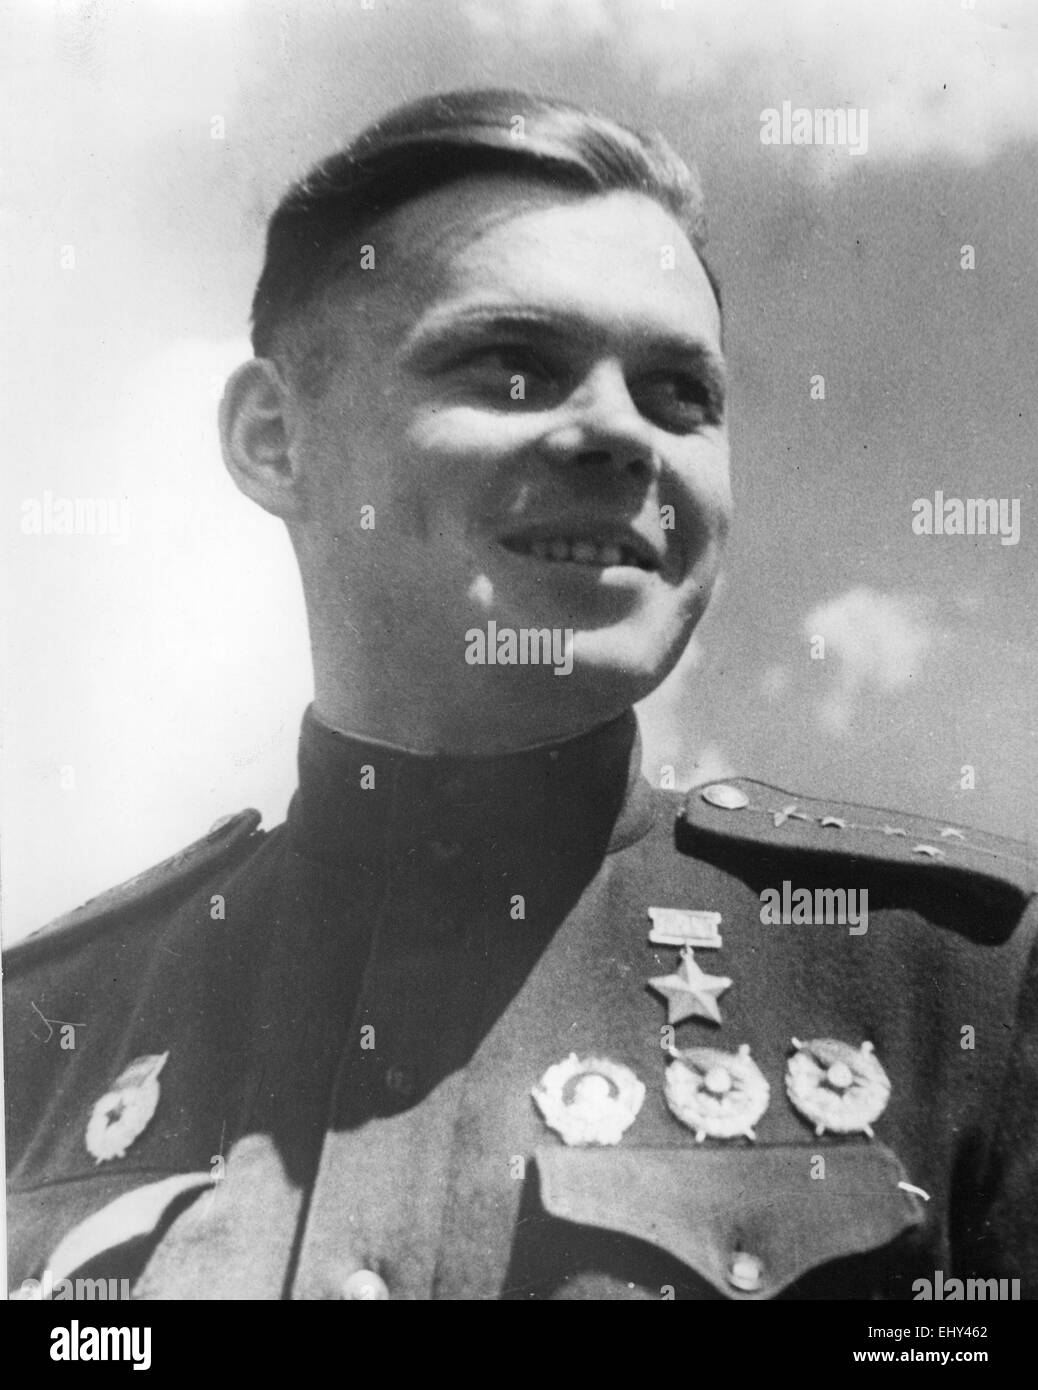 GRIGORIY  RECHKALOV  (1920-1990) Soviet fighter pilot ace. He wears his two   Hero of the Soviet Union medals awarded in May 1943 and July 1944. He was the second highest scoring Soviet pilot with 56 personal kills. Stock Photo